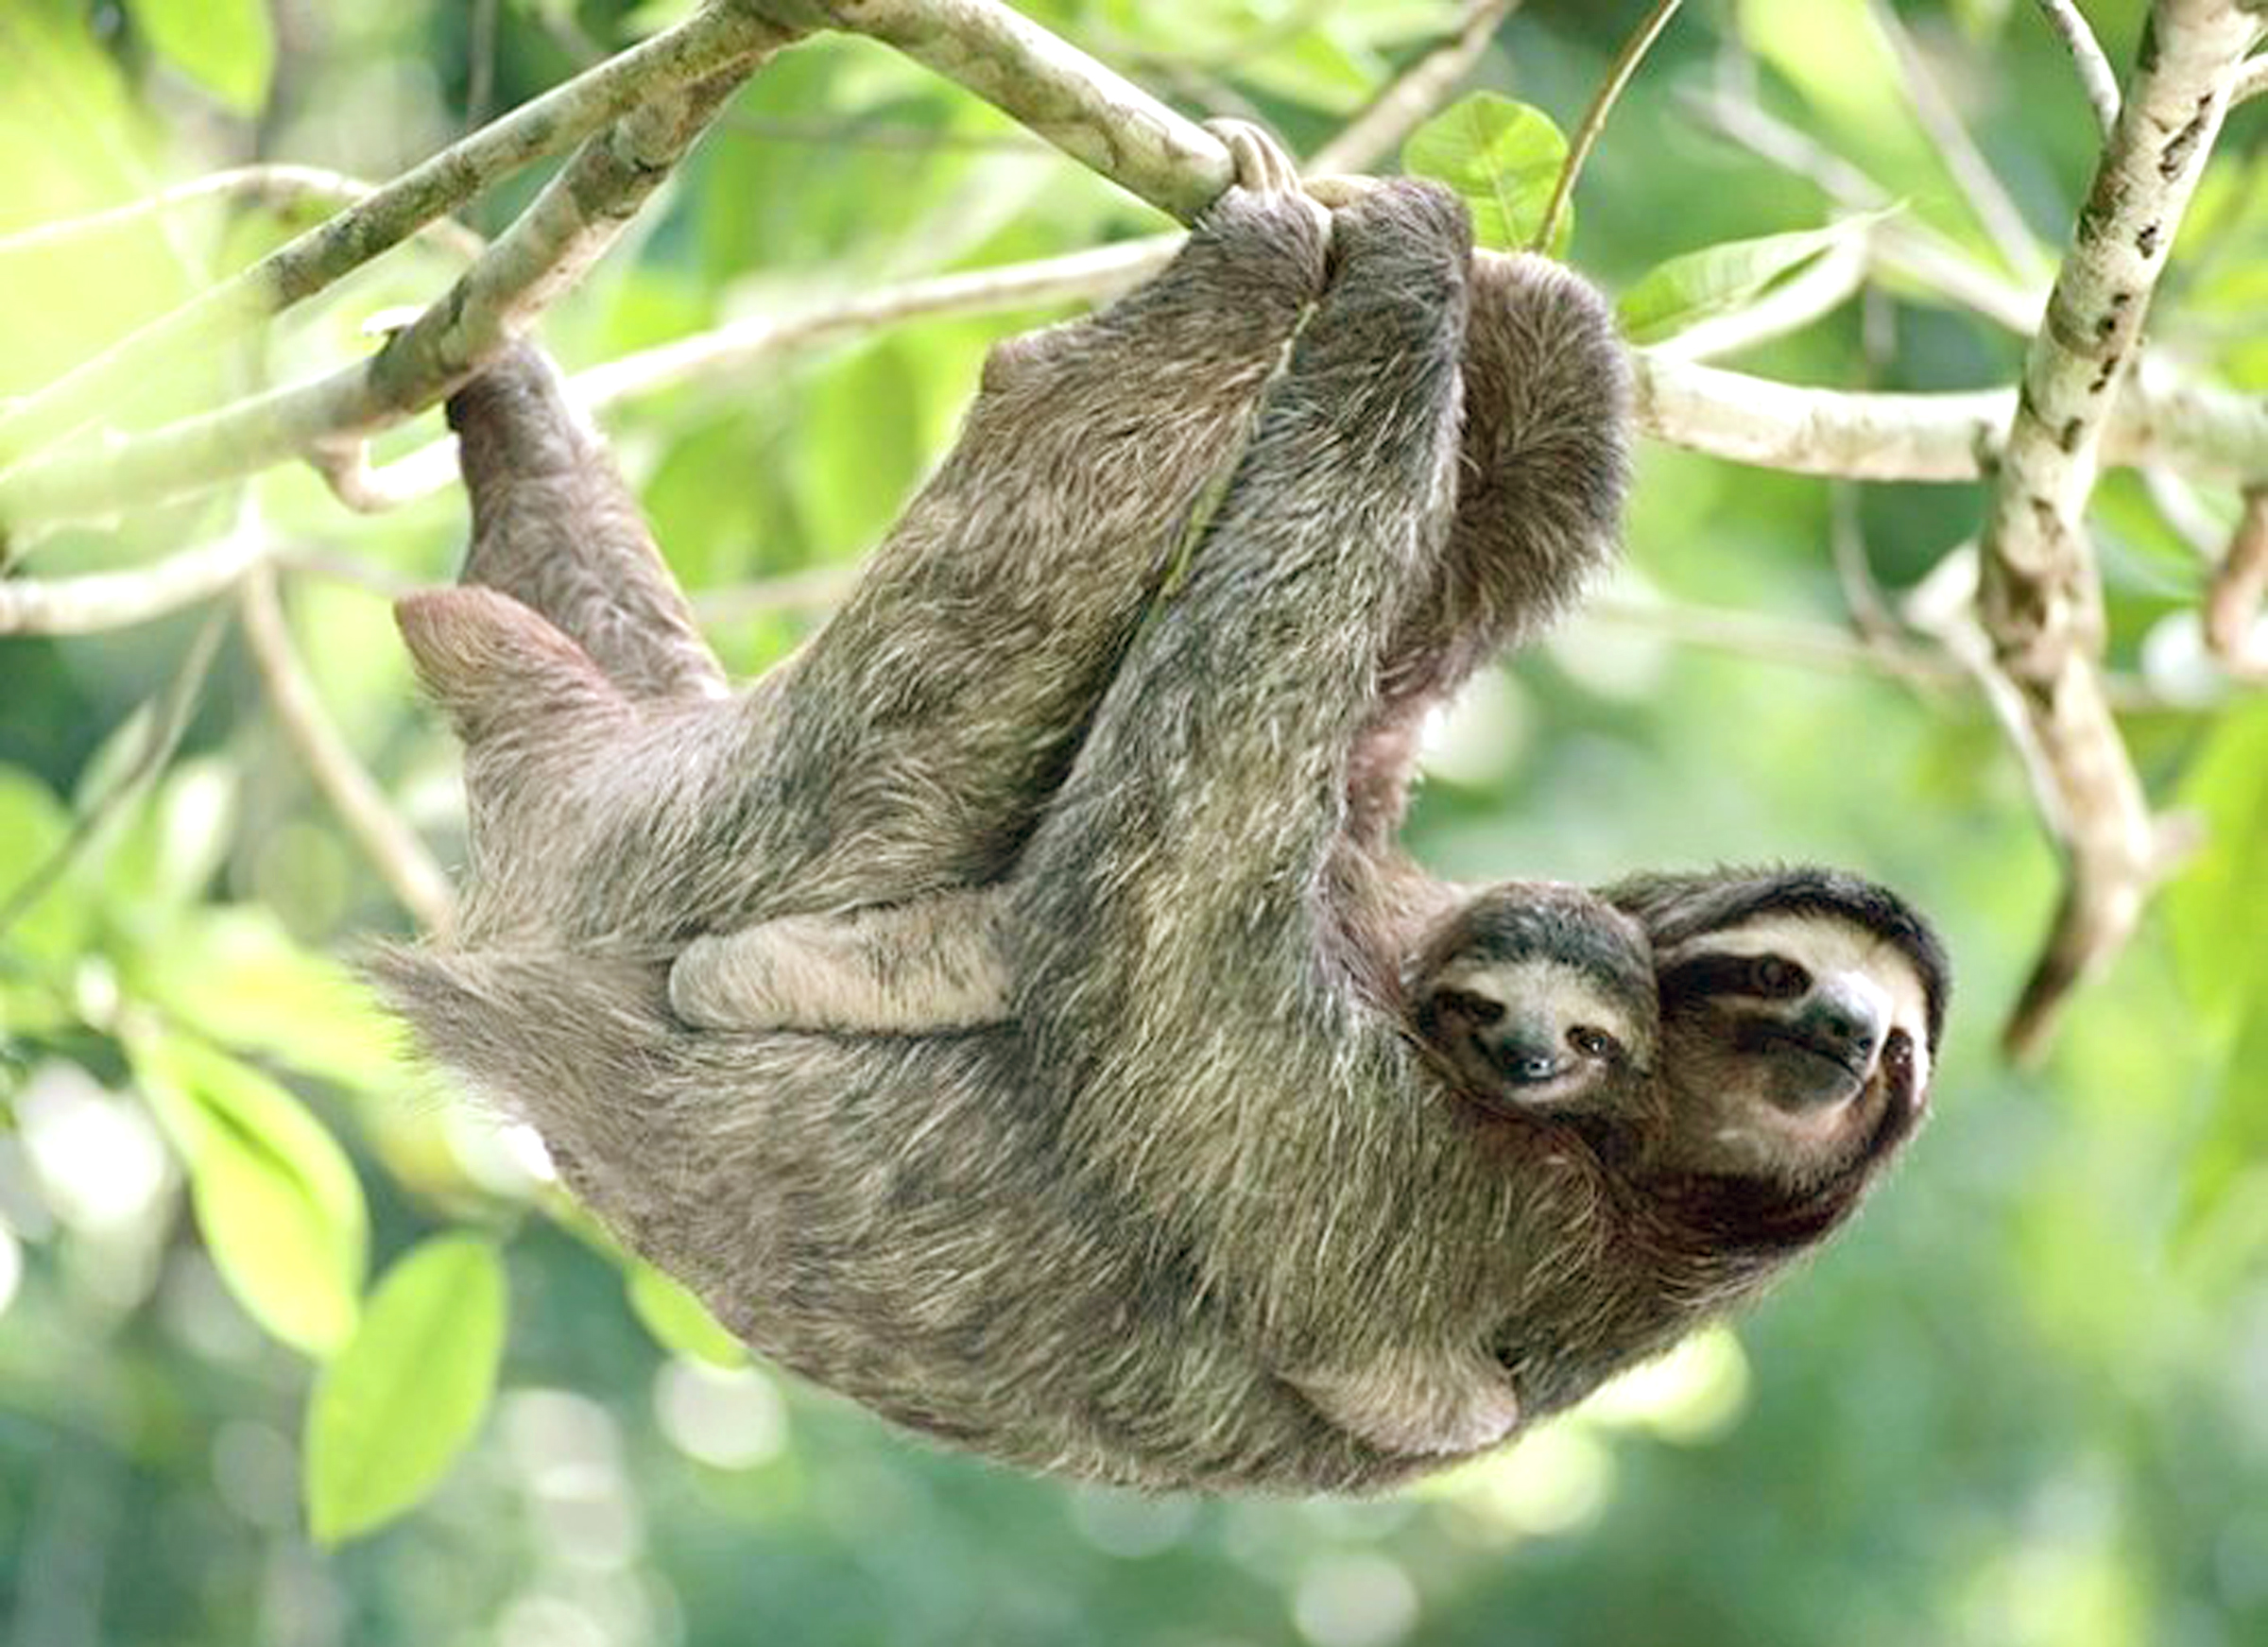 Female sloths are normally pregnant for seven to 10 months and will only give birth to one baby.